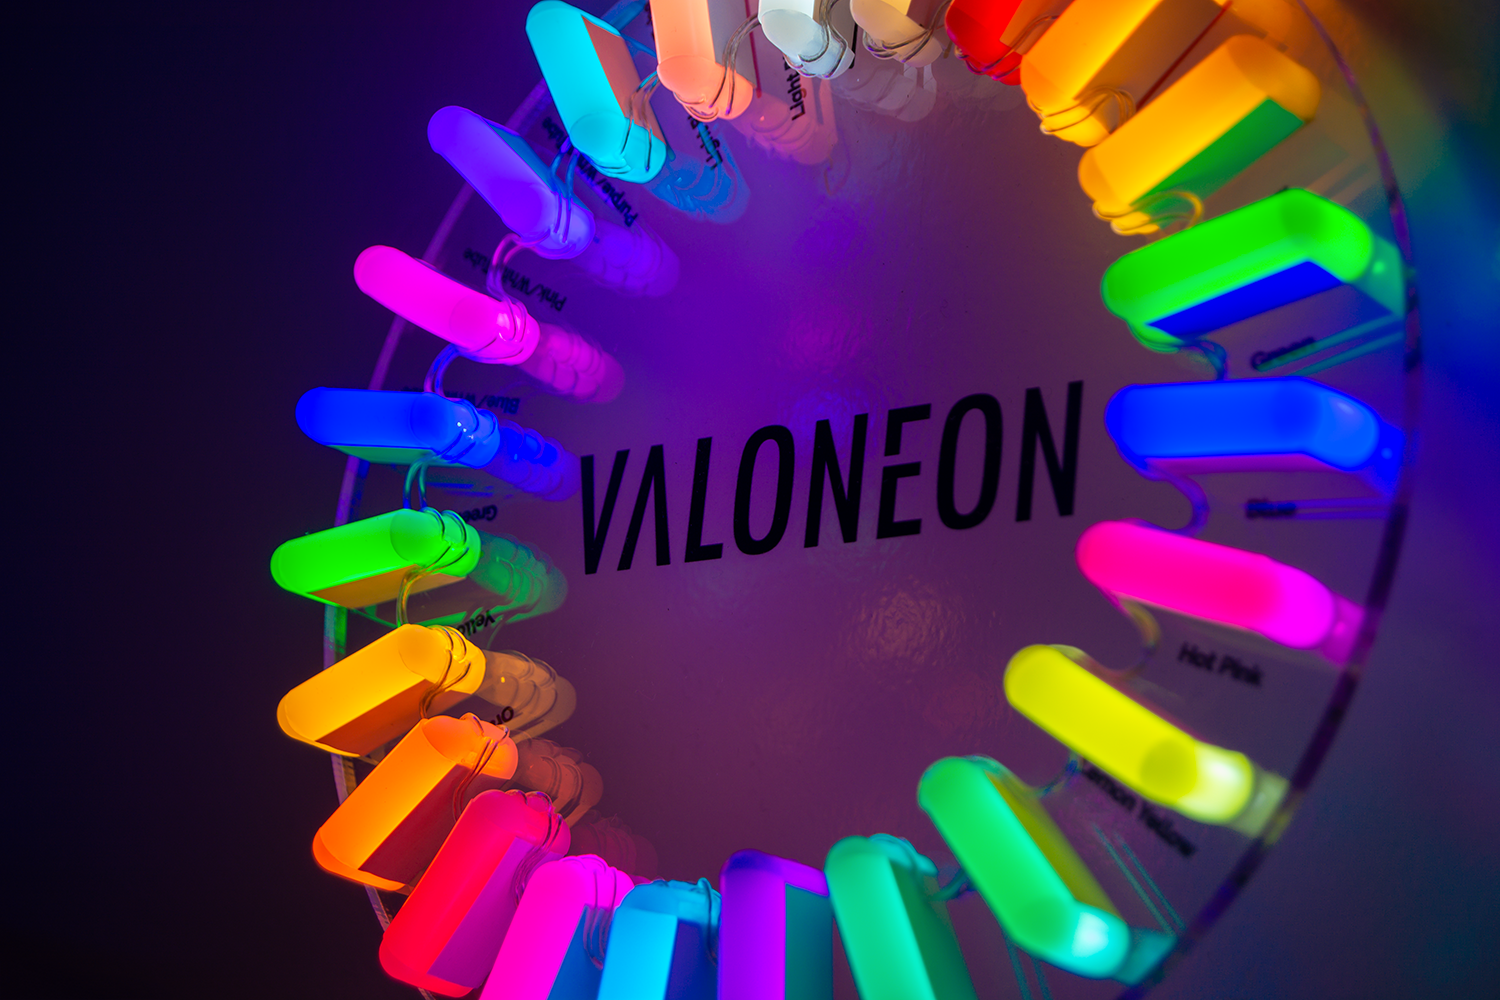 A neon color wheel sample by Valoneon